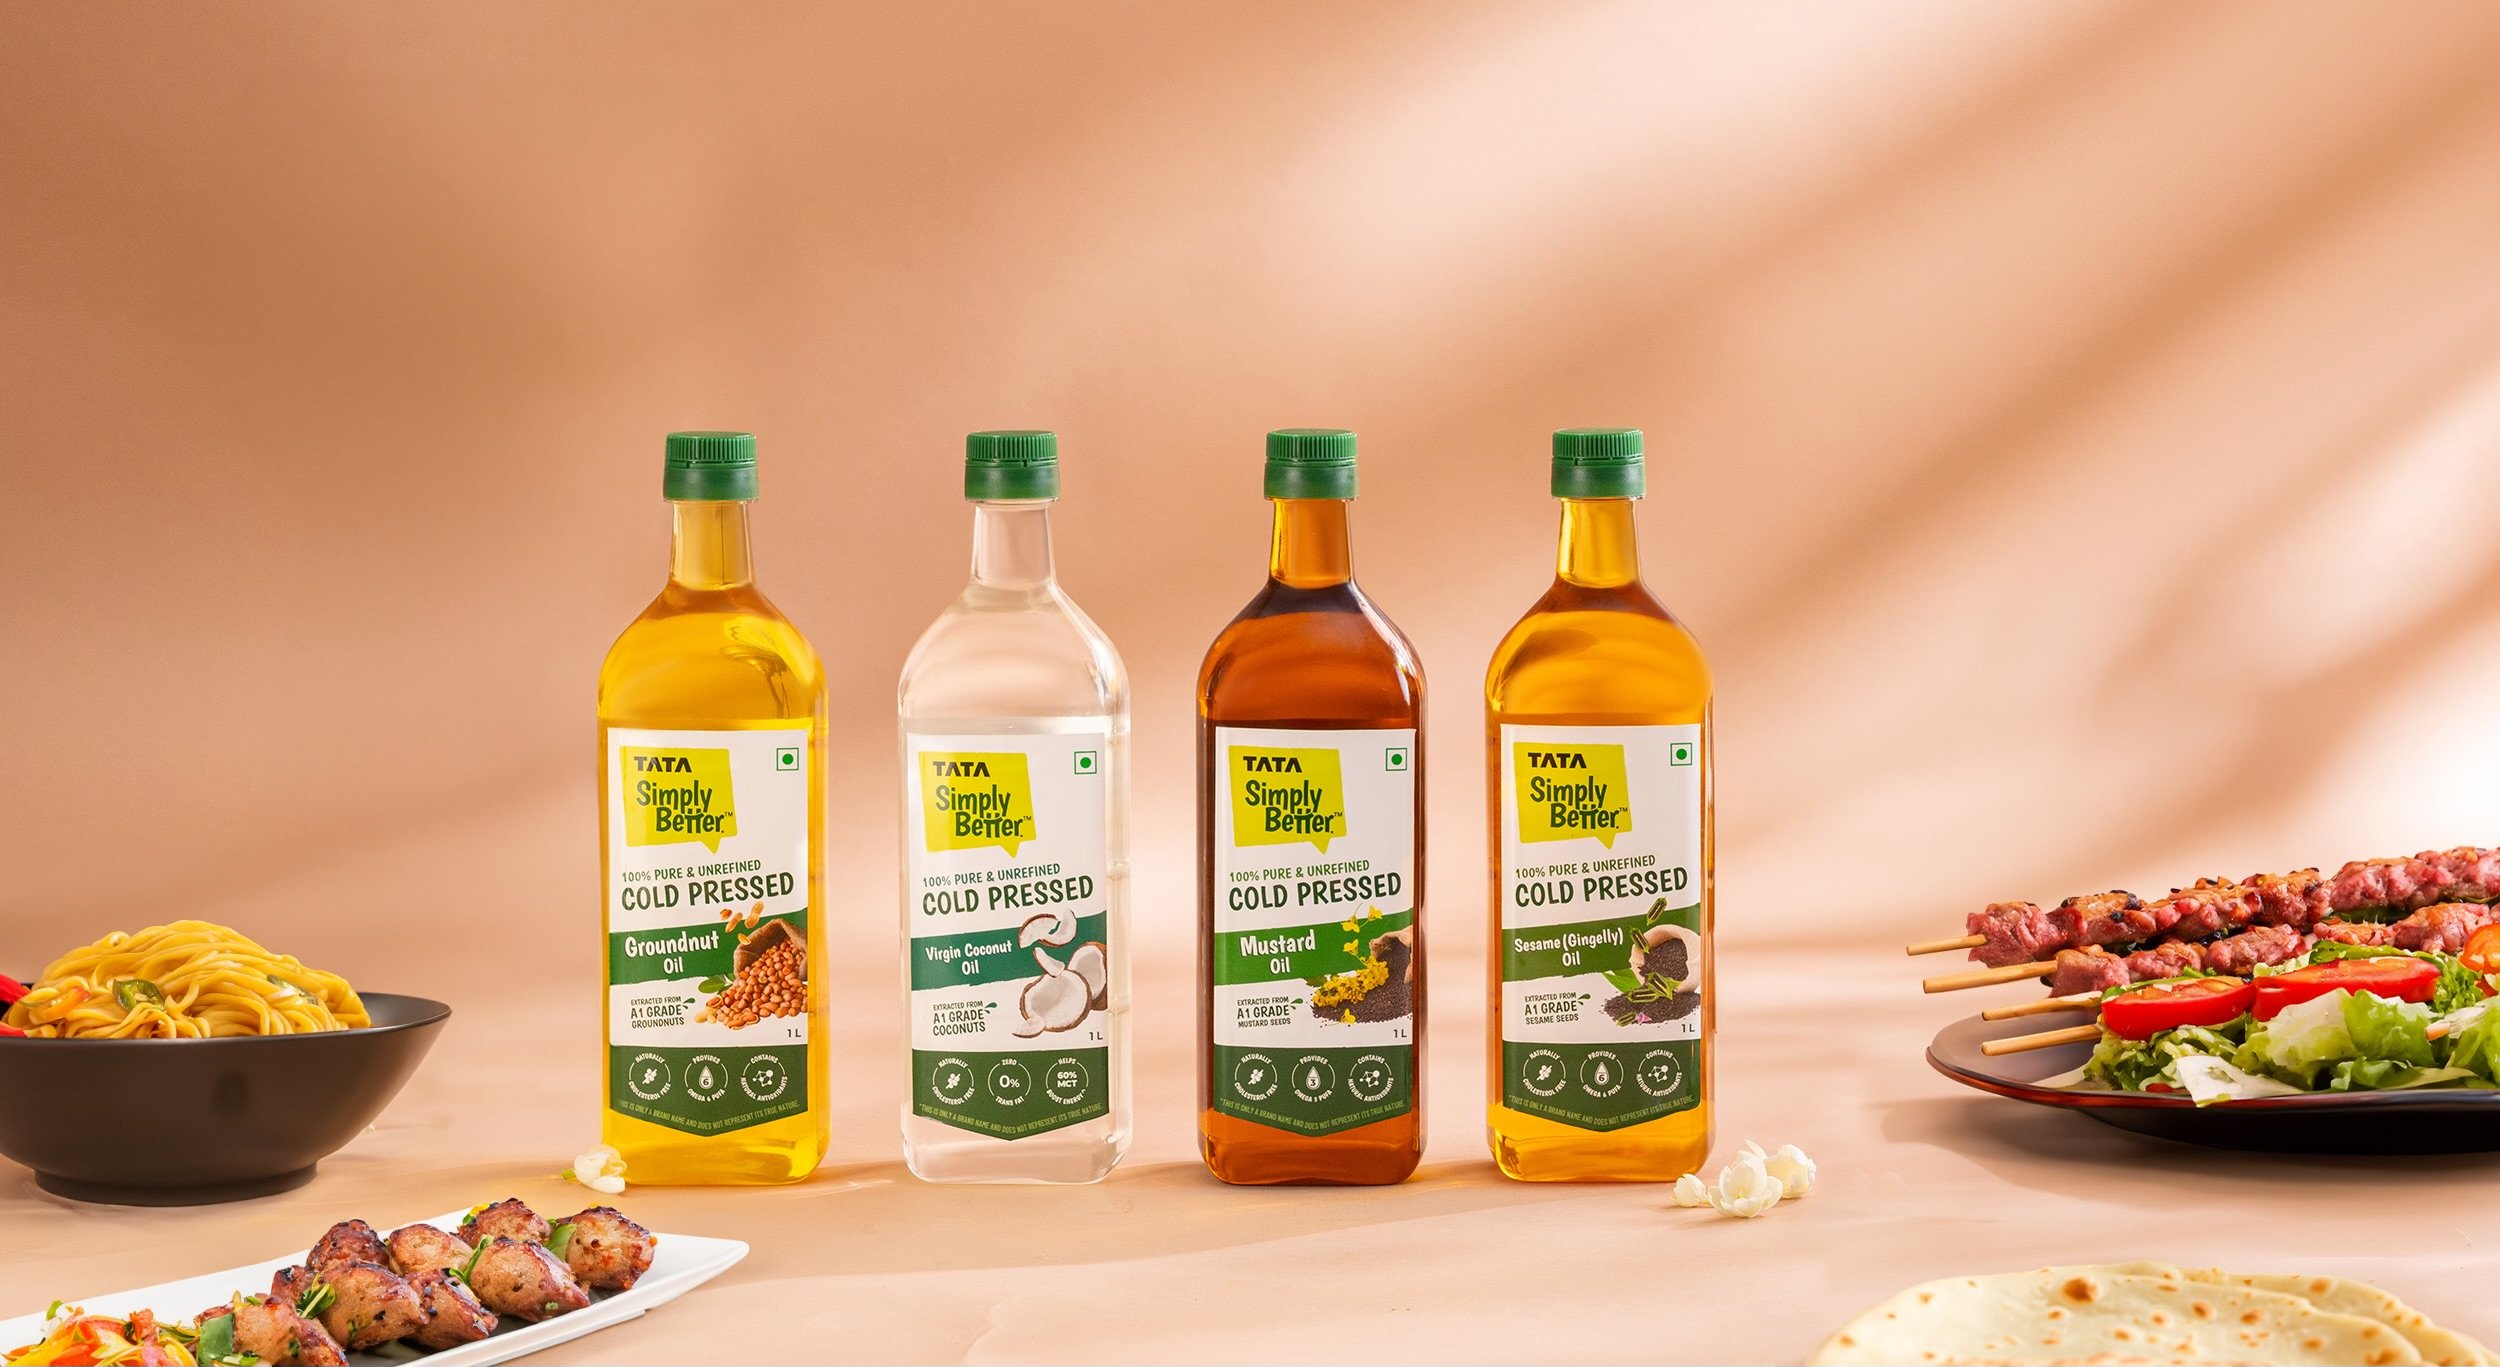 Tata Simply Better packaging designs Cold pressed oils by Yellow Fishes 